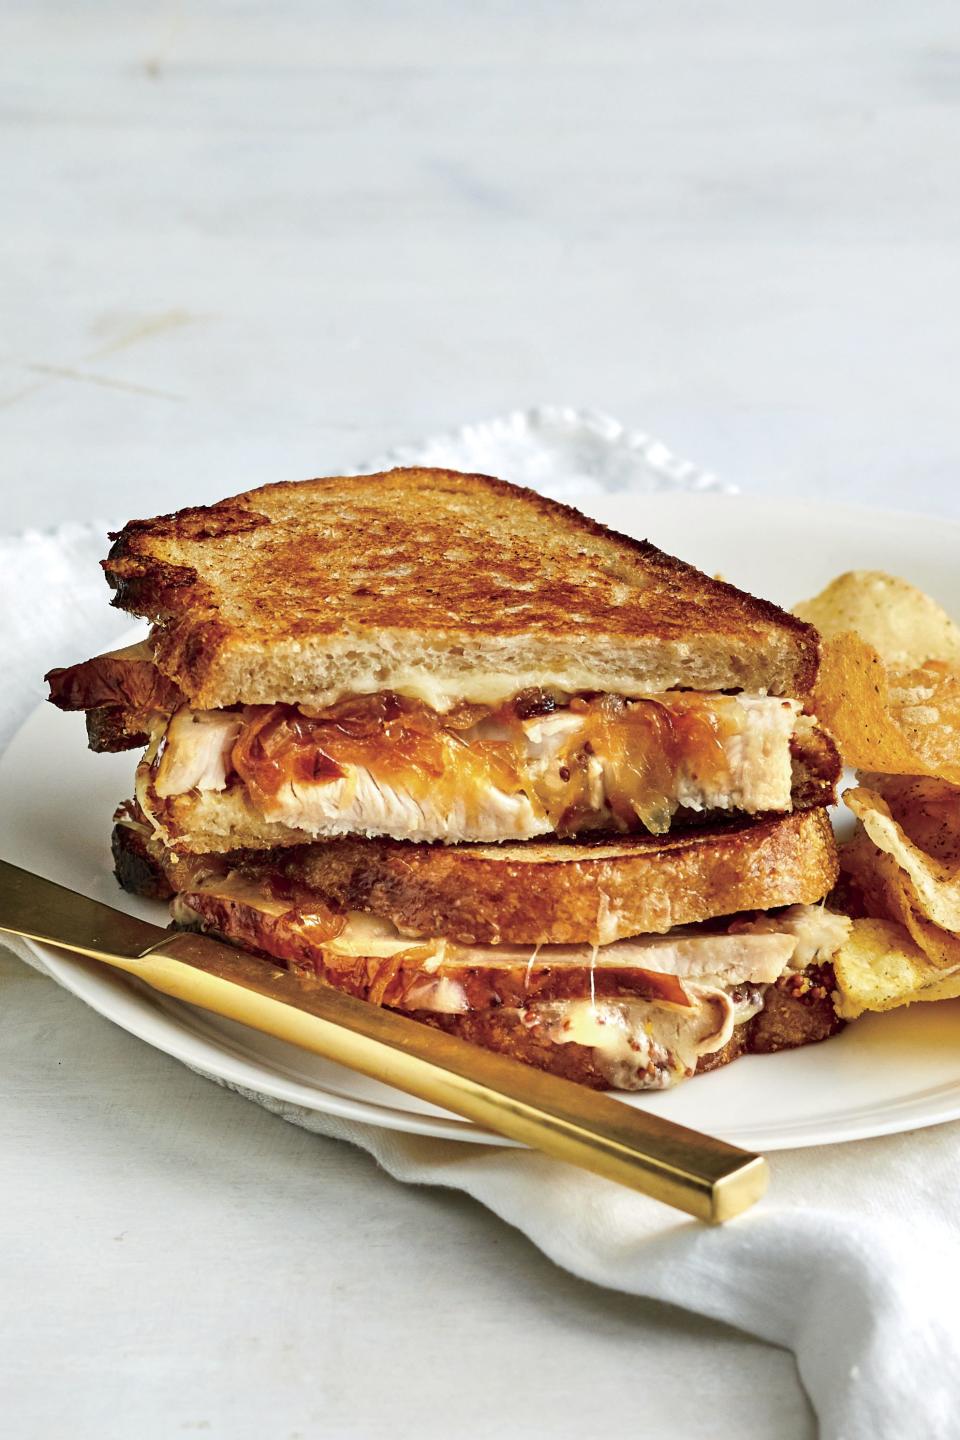 Turkey, Caramelized Onion, and Gruyère Grilled Cheese